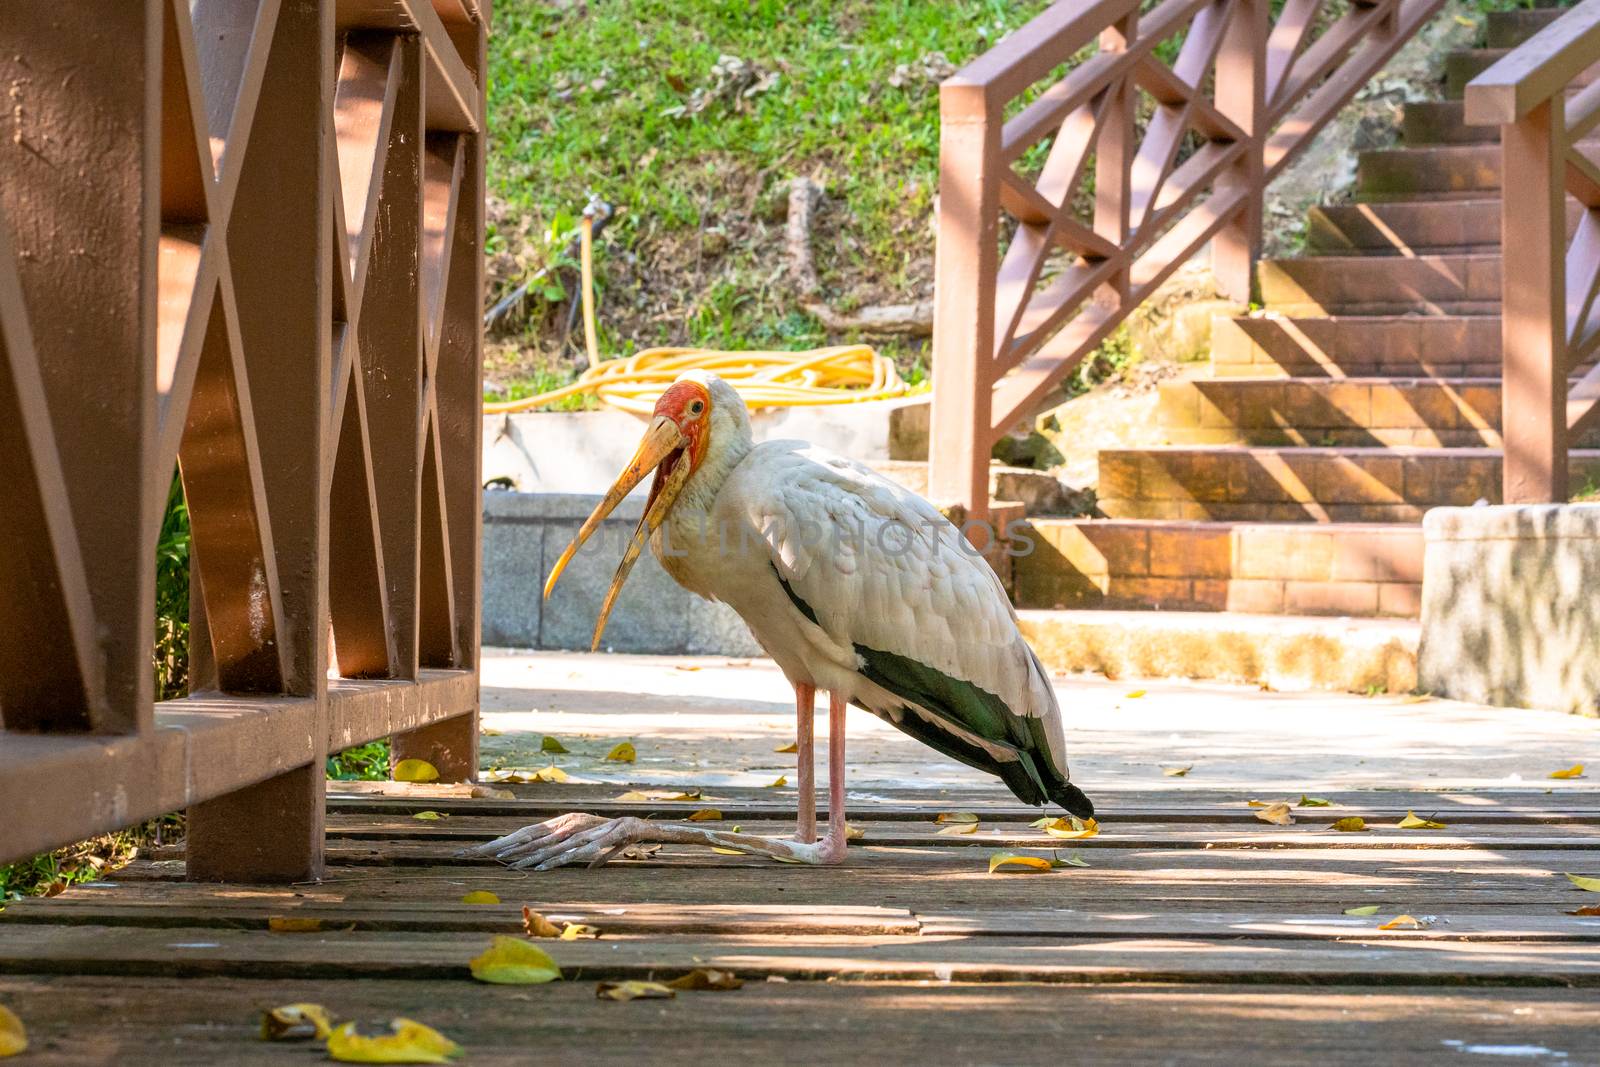 A milk stork sits on the ground with an open beak. Hot day.